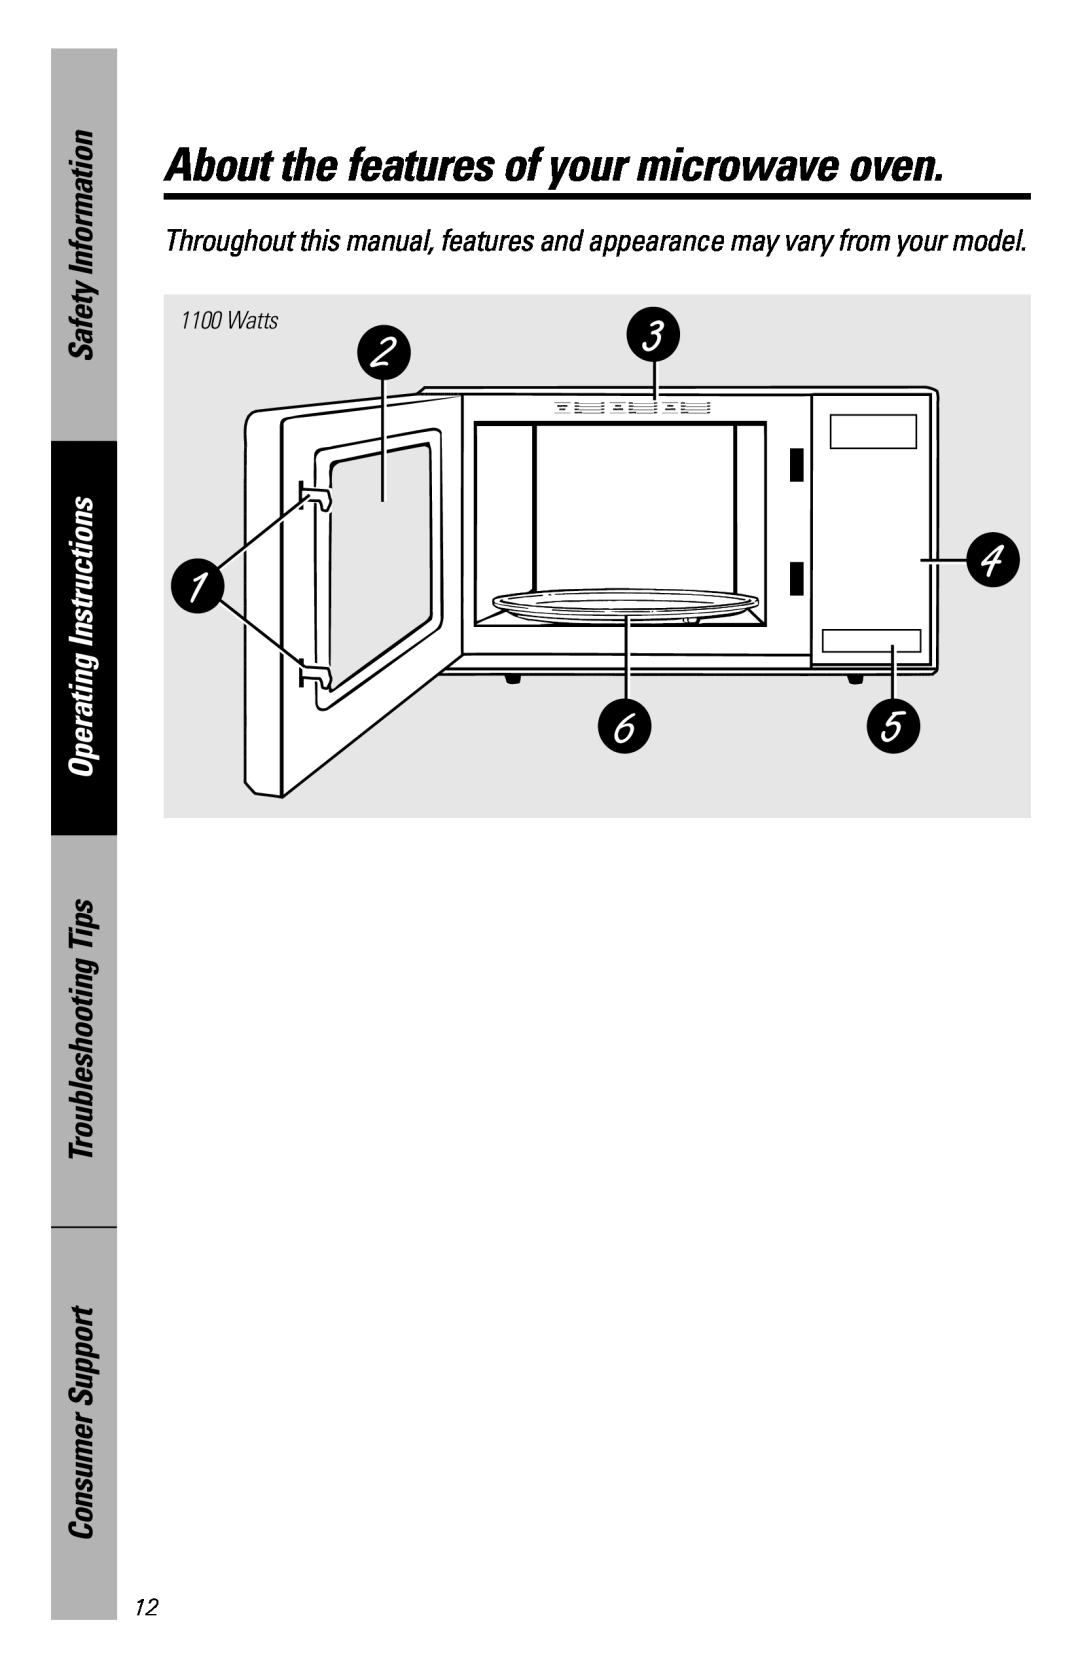 GE JES1036 owner manual About the features of your microwave oven, Safety Information, Operating Instructions 